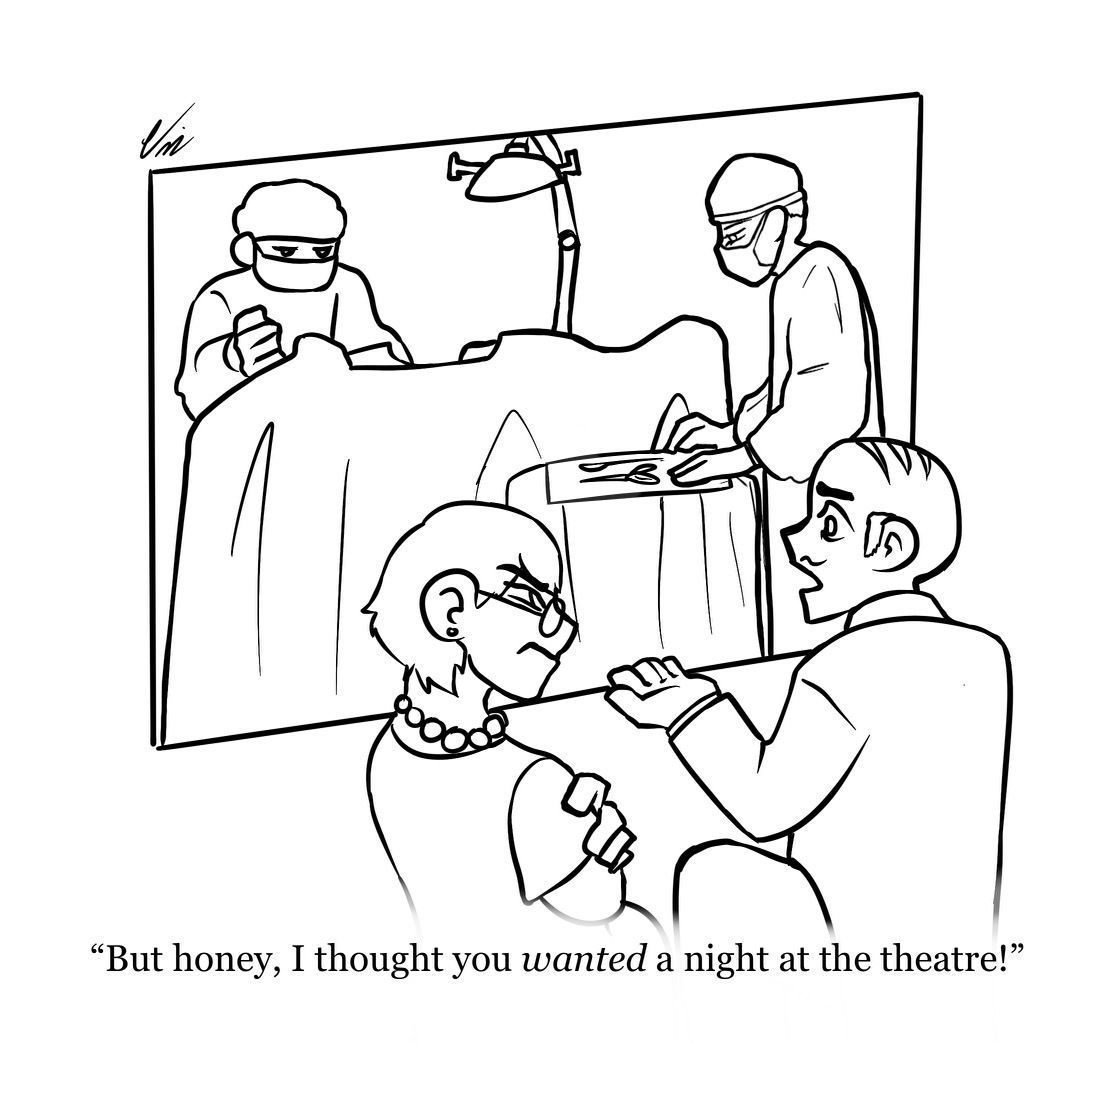 We're awaiting the Broadway debut of 'Phantom of the Operating Theatre'... No tickets needed for #medical #mirth in our cartoon collection here: buff.ly/44KNzhA #OperatingTheatre #Surgery #Phantom #DoctorHumor #VinSellinger